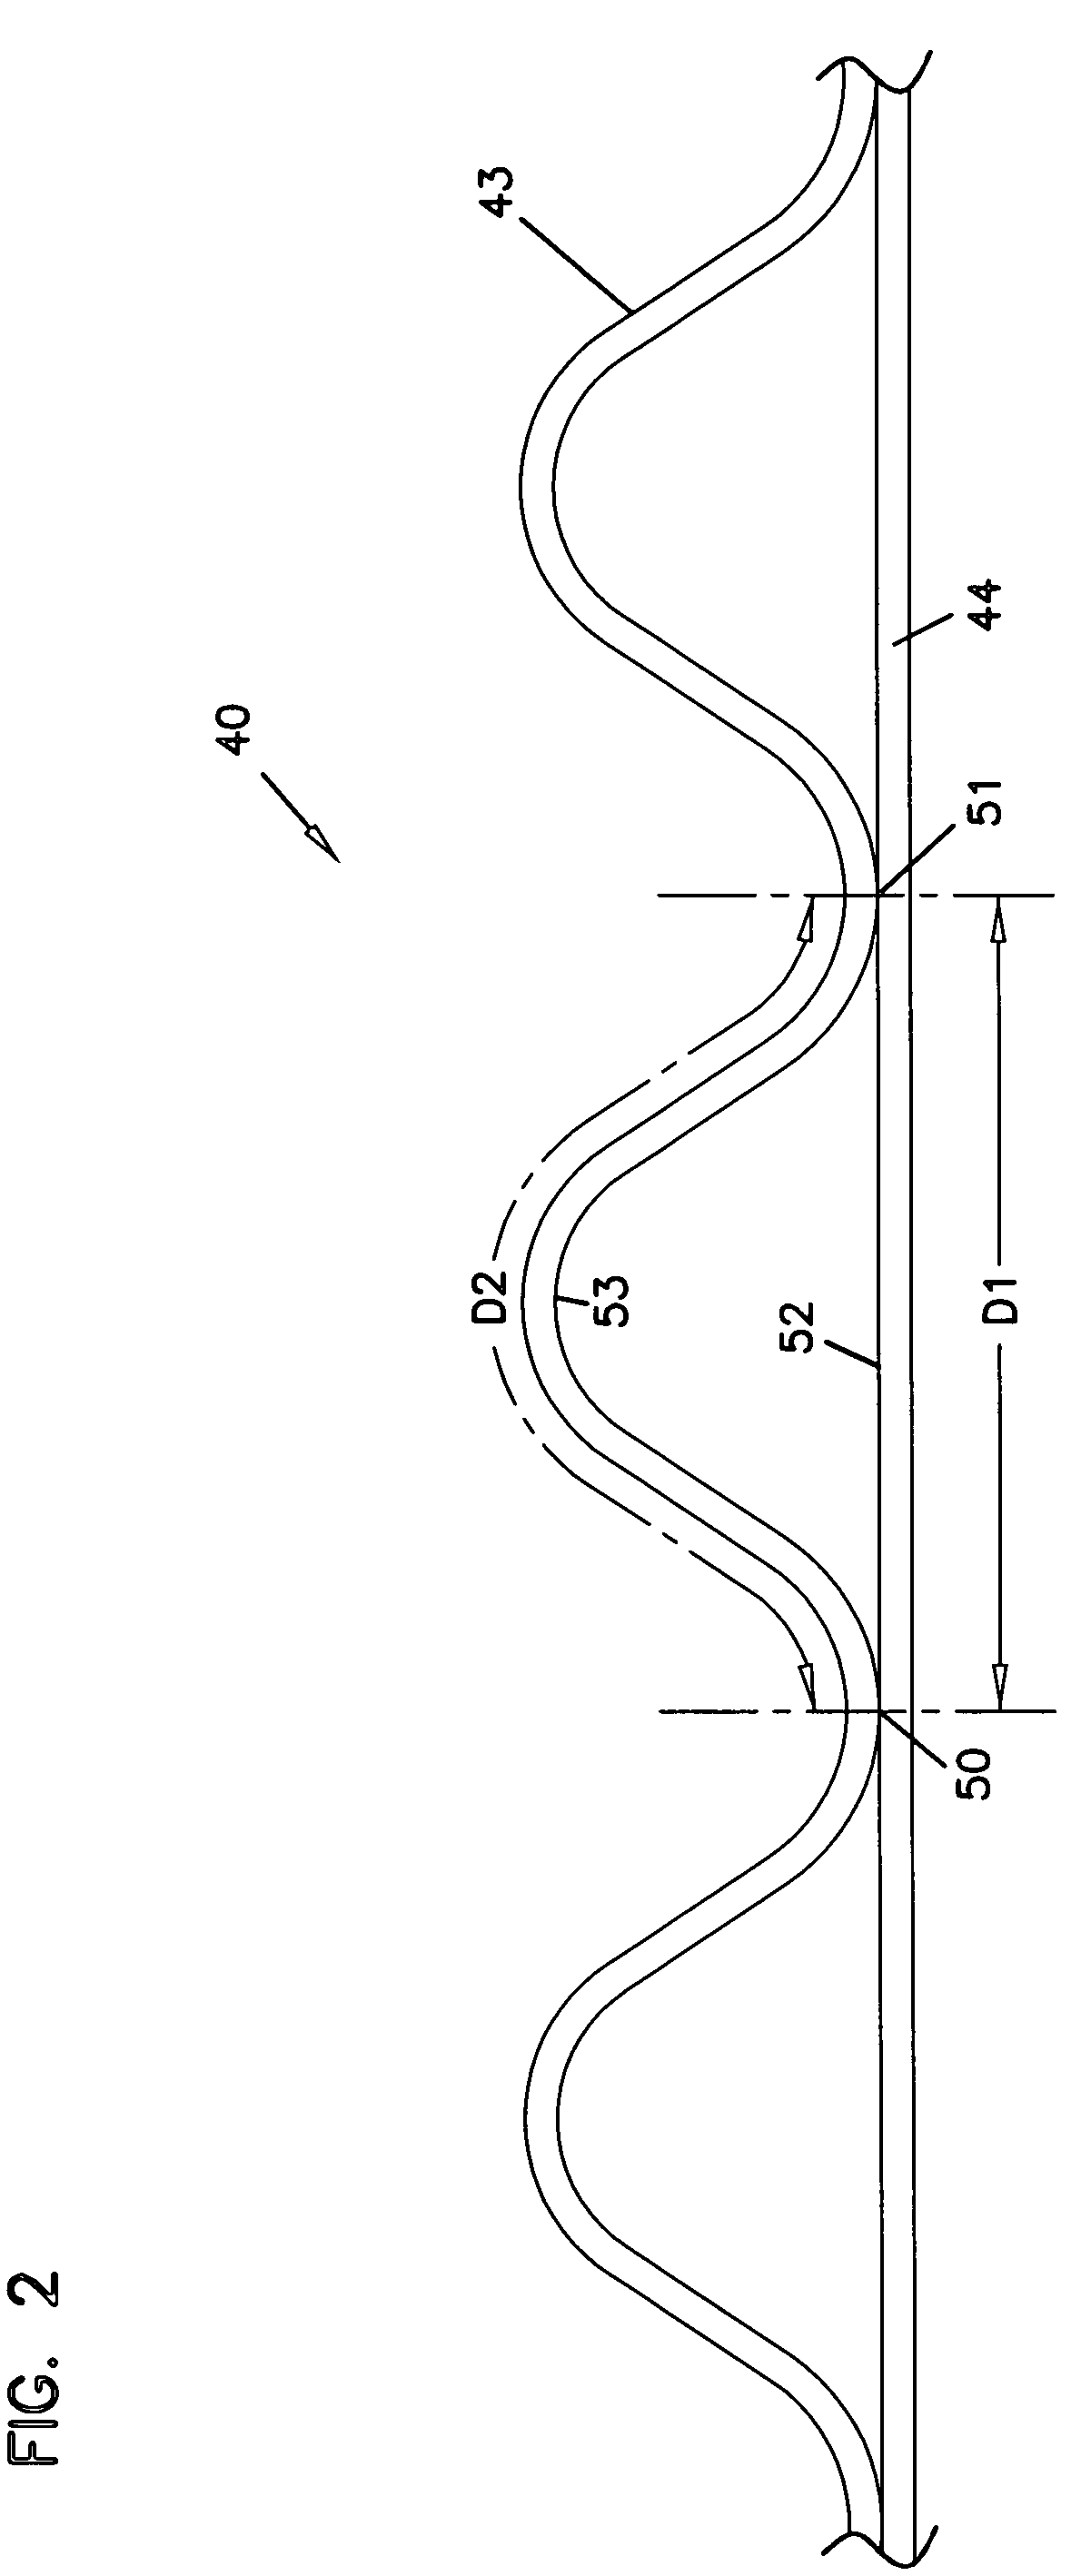 Air cleaner arrangements; components thereof; and, methods